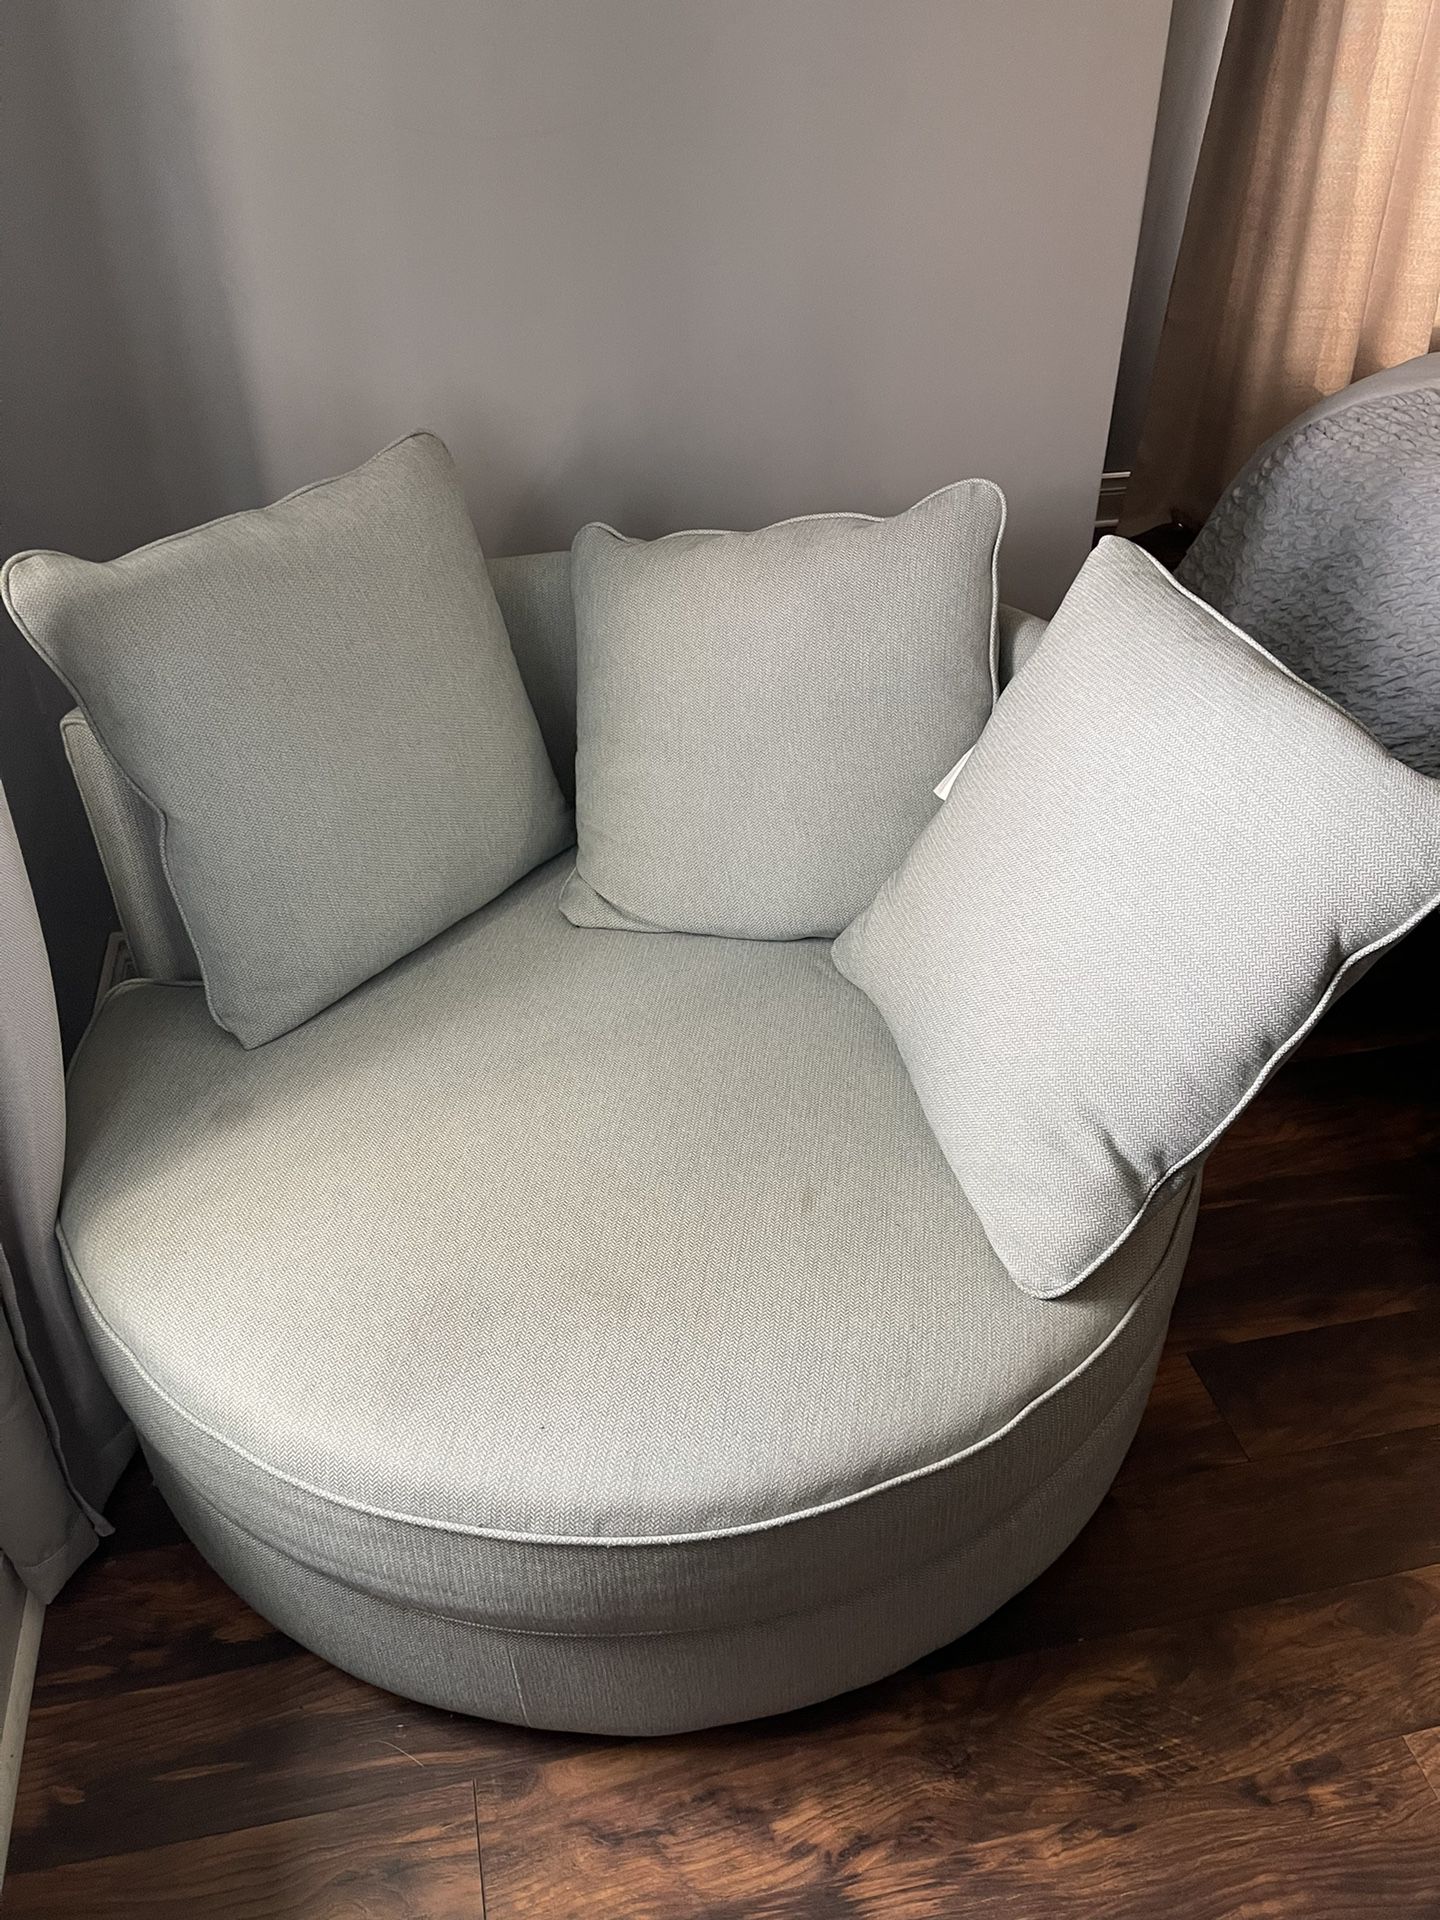 Oversized Round Swivel Couch Chair